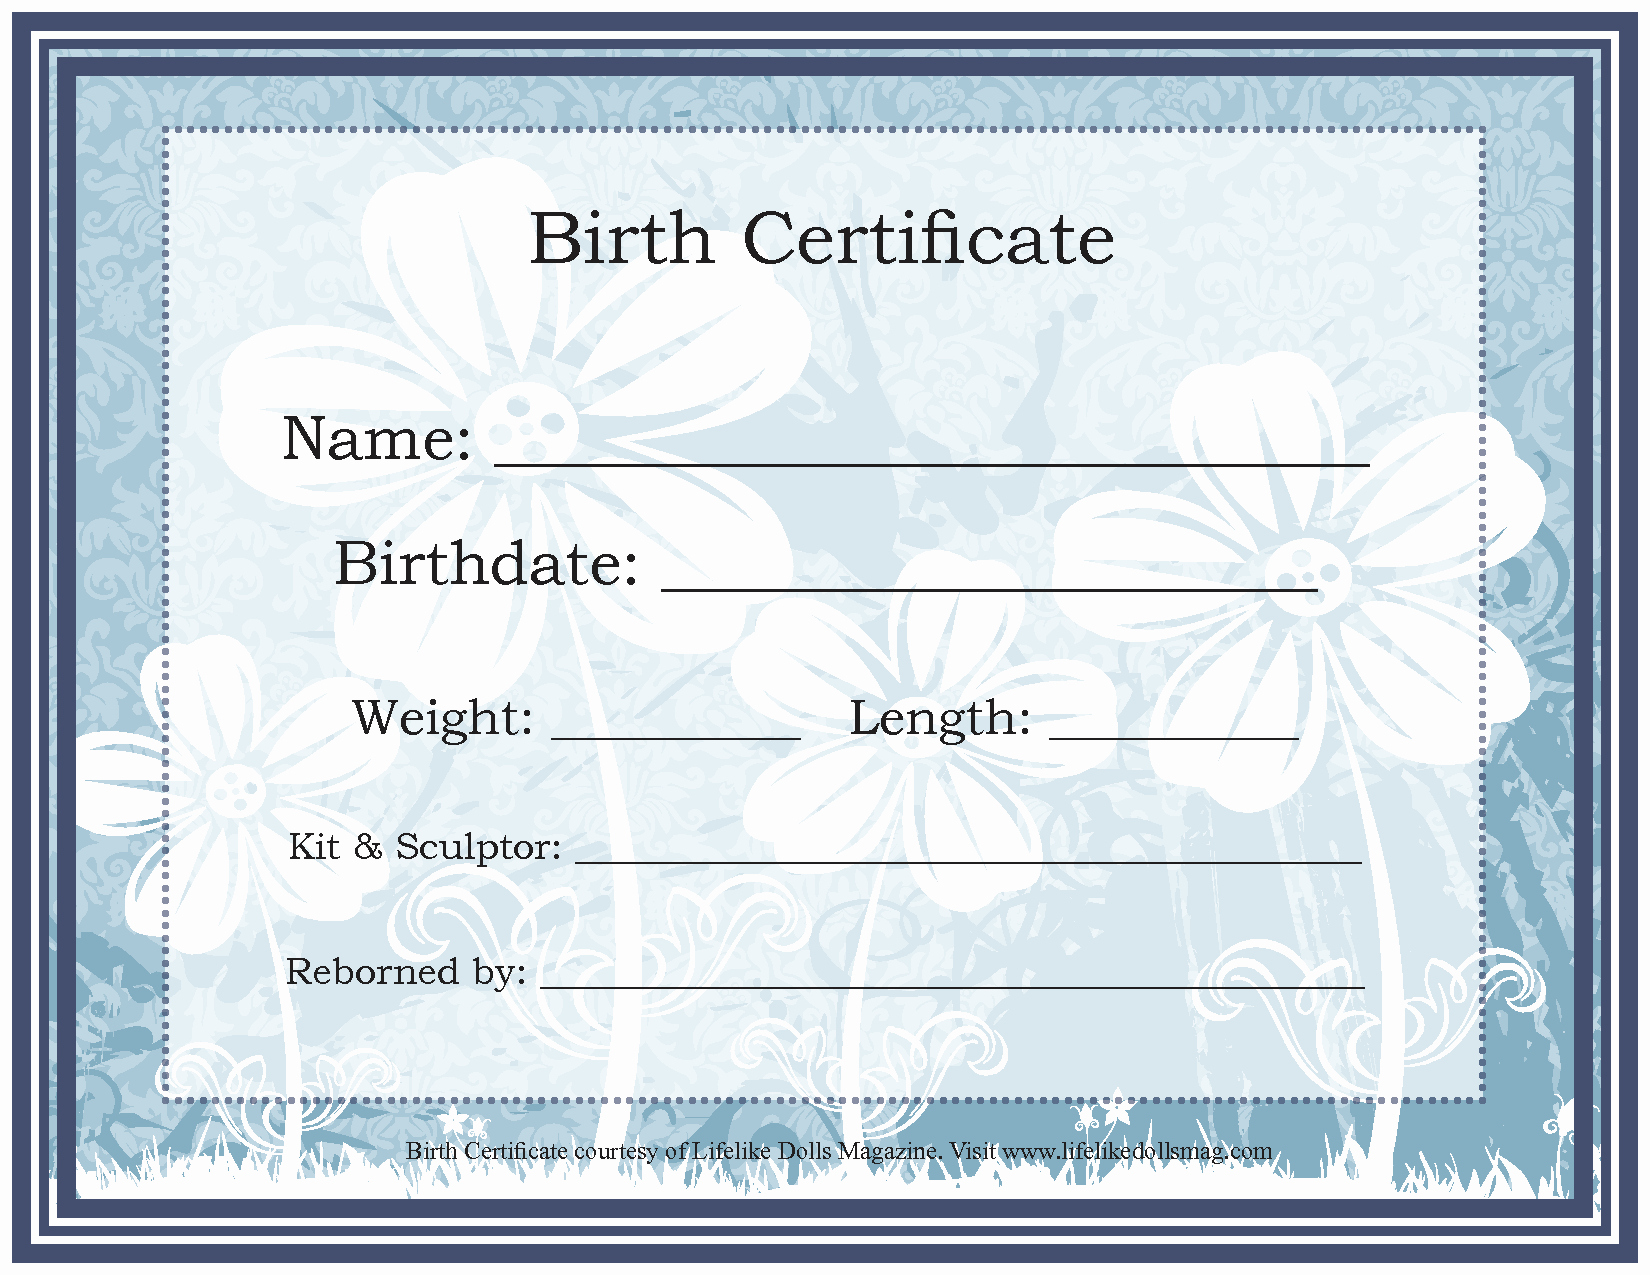 Official Birth Certificate Template Beautiful Ficial Birth Certificate Template Birth Certificate